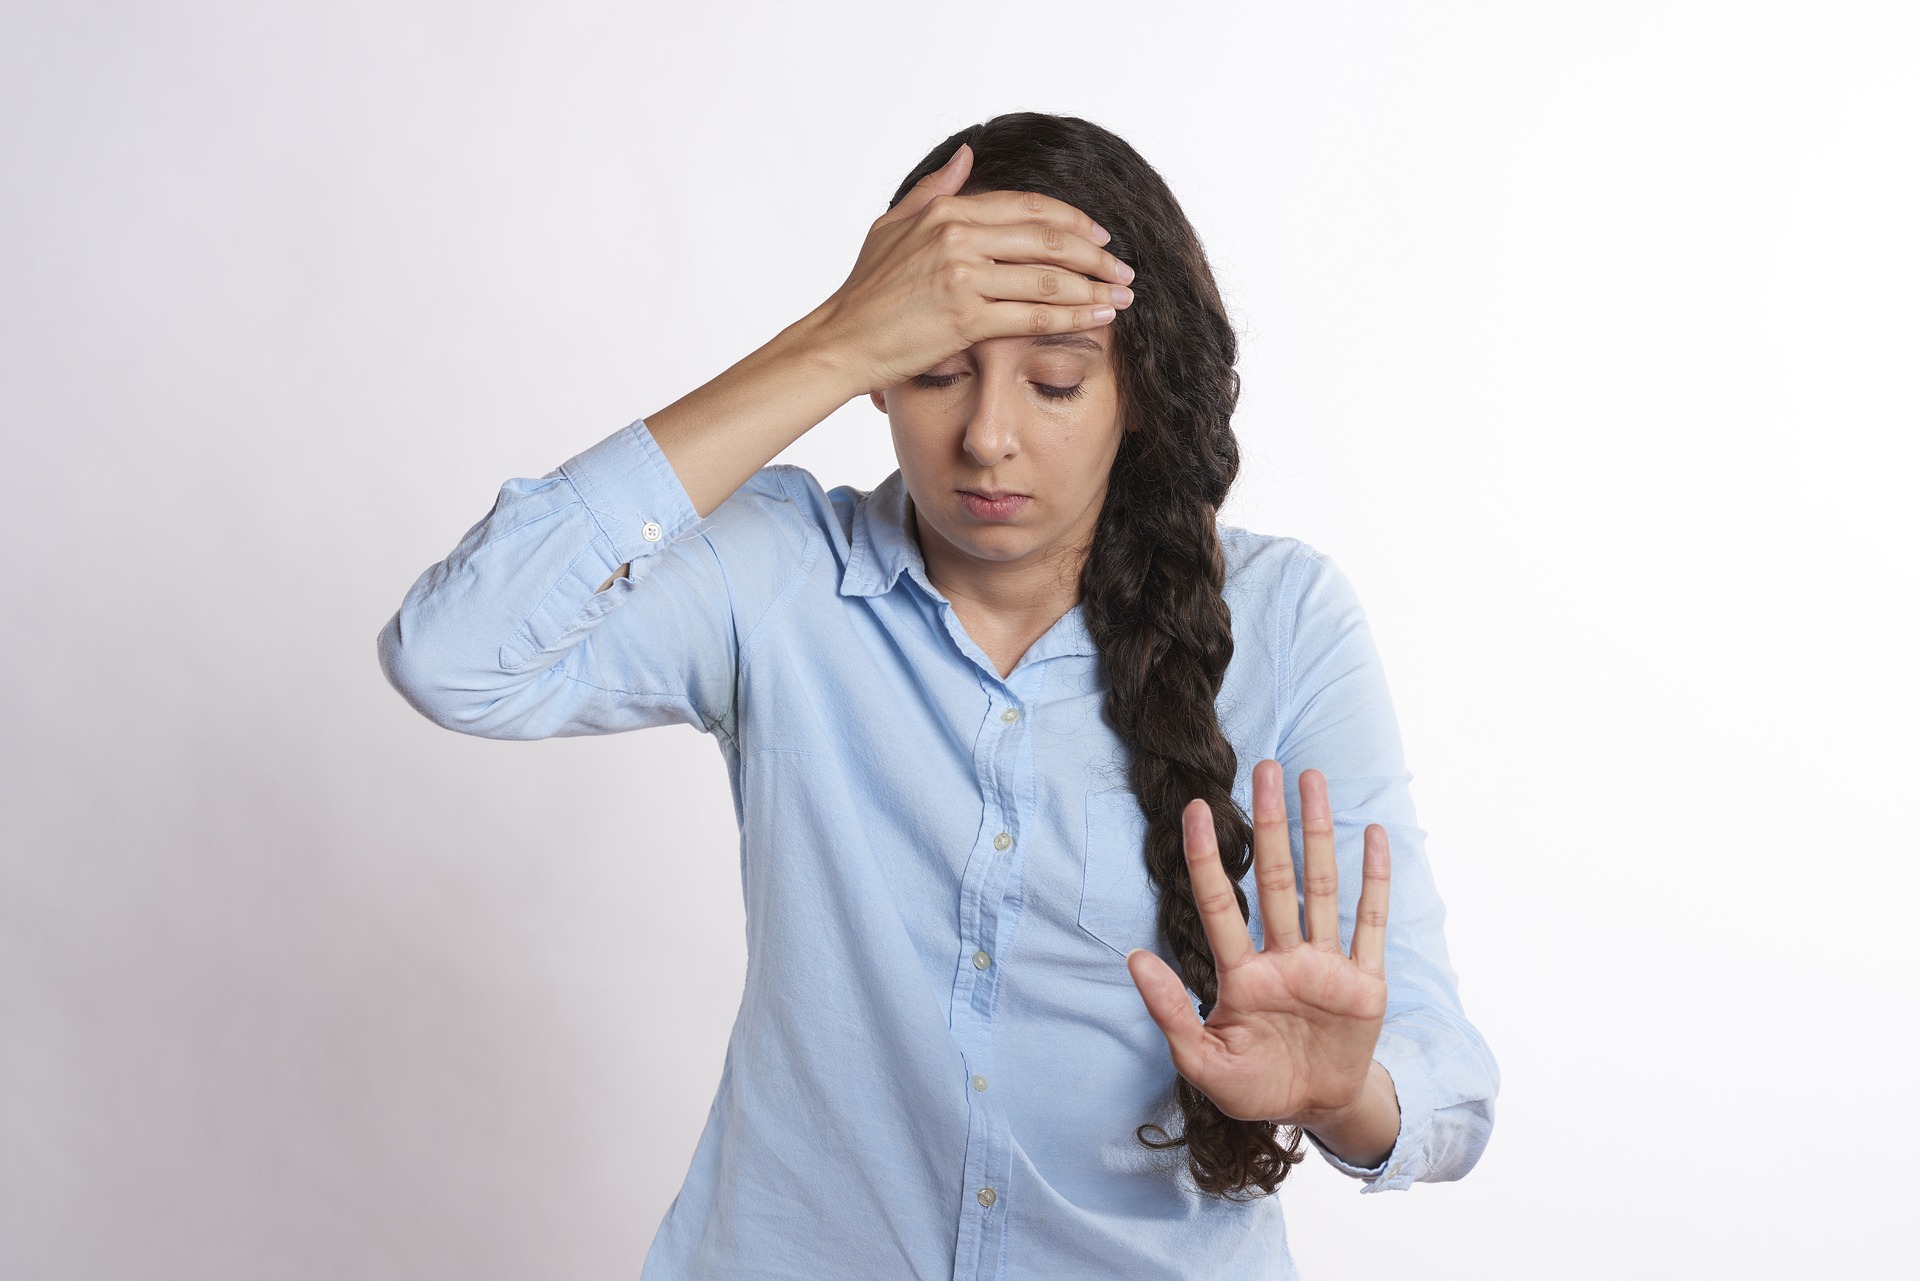 overwhelmed woman experiencing stress